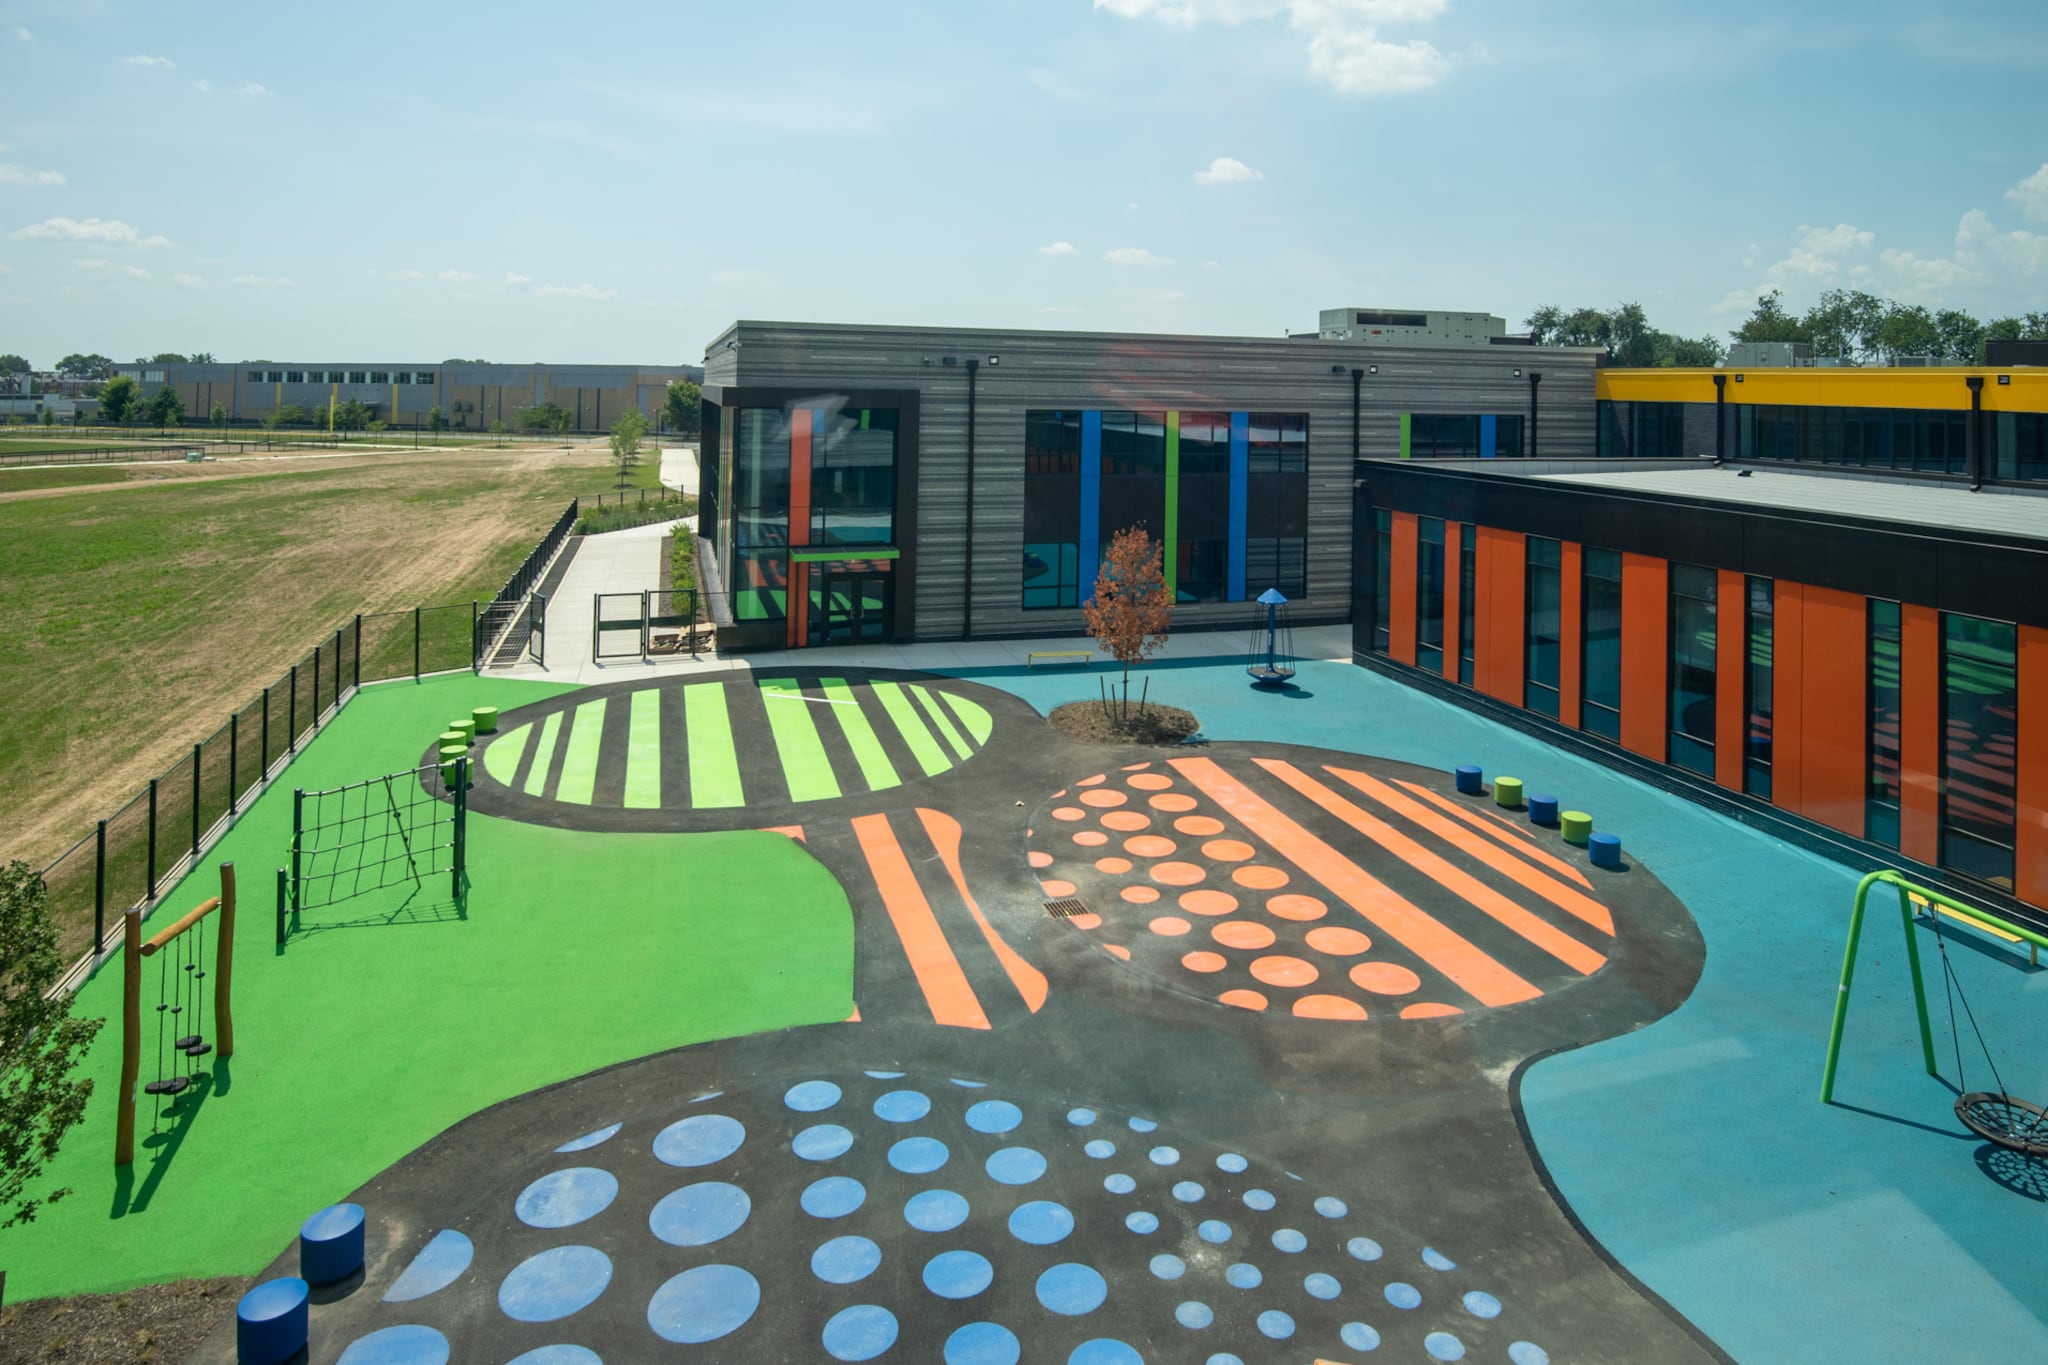 The courtyard of the new Northeast Community Propel Academy has bright green, orange, and blue floors and recess equipment.